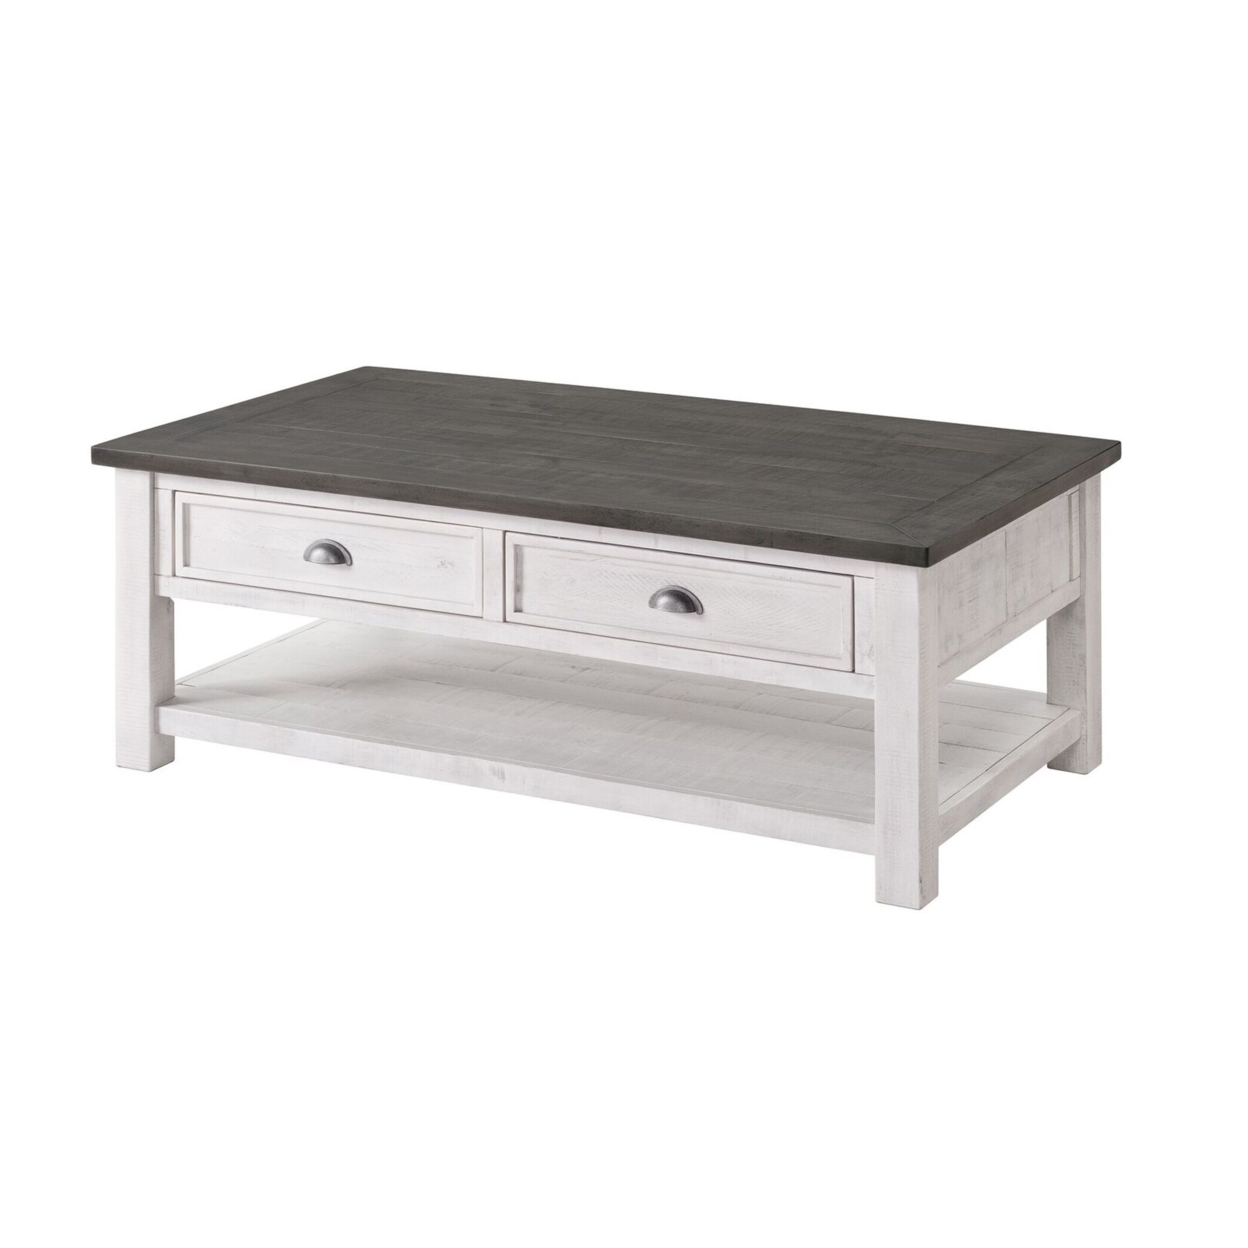 Coastal Rectangular Wooden Coffee Table With 2 Drawers, White And Gray- Saltoro Sherpi